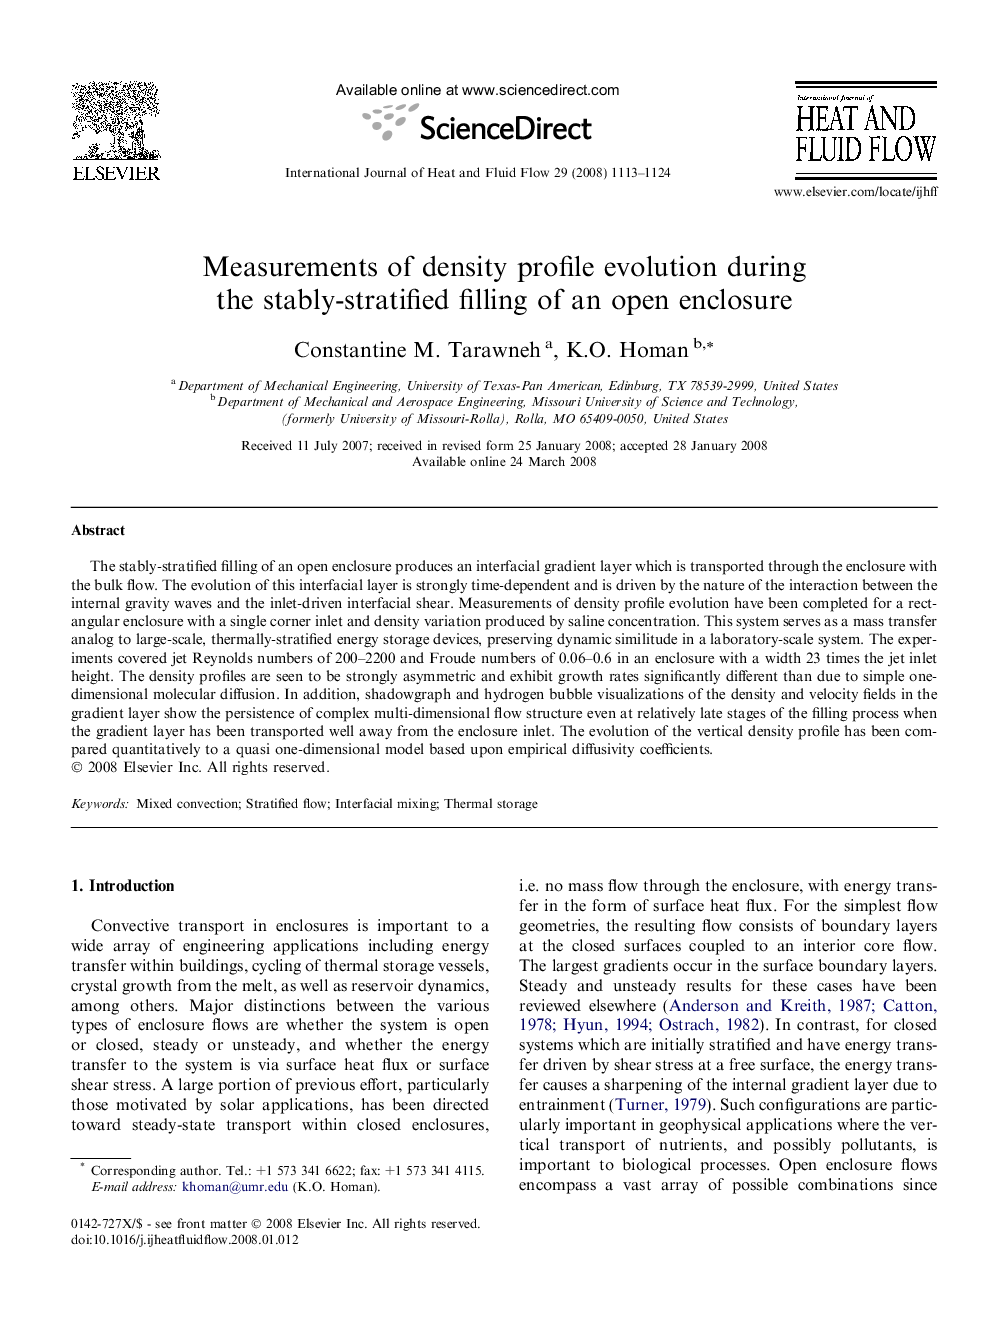 Measurements of density profile evolution during the stably-stratified filling of an open enclosure